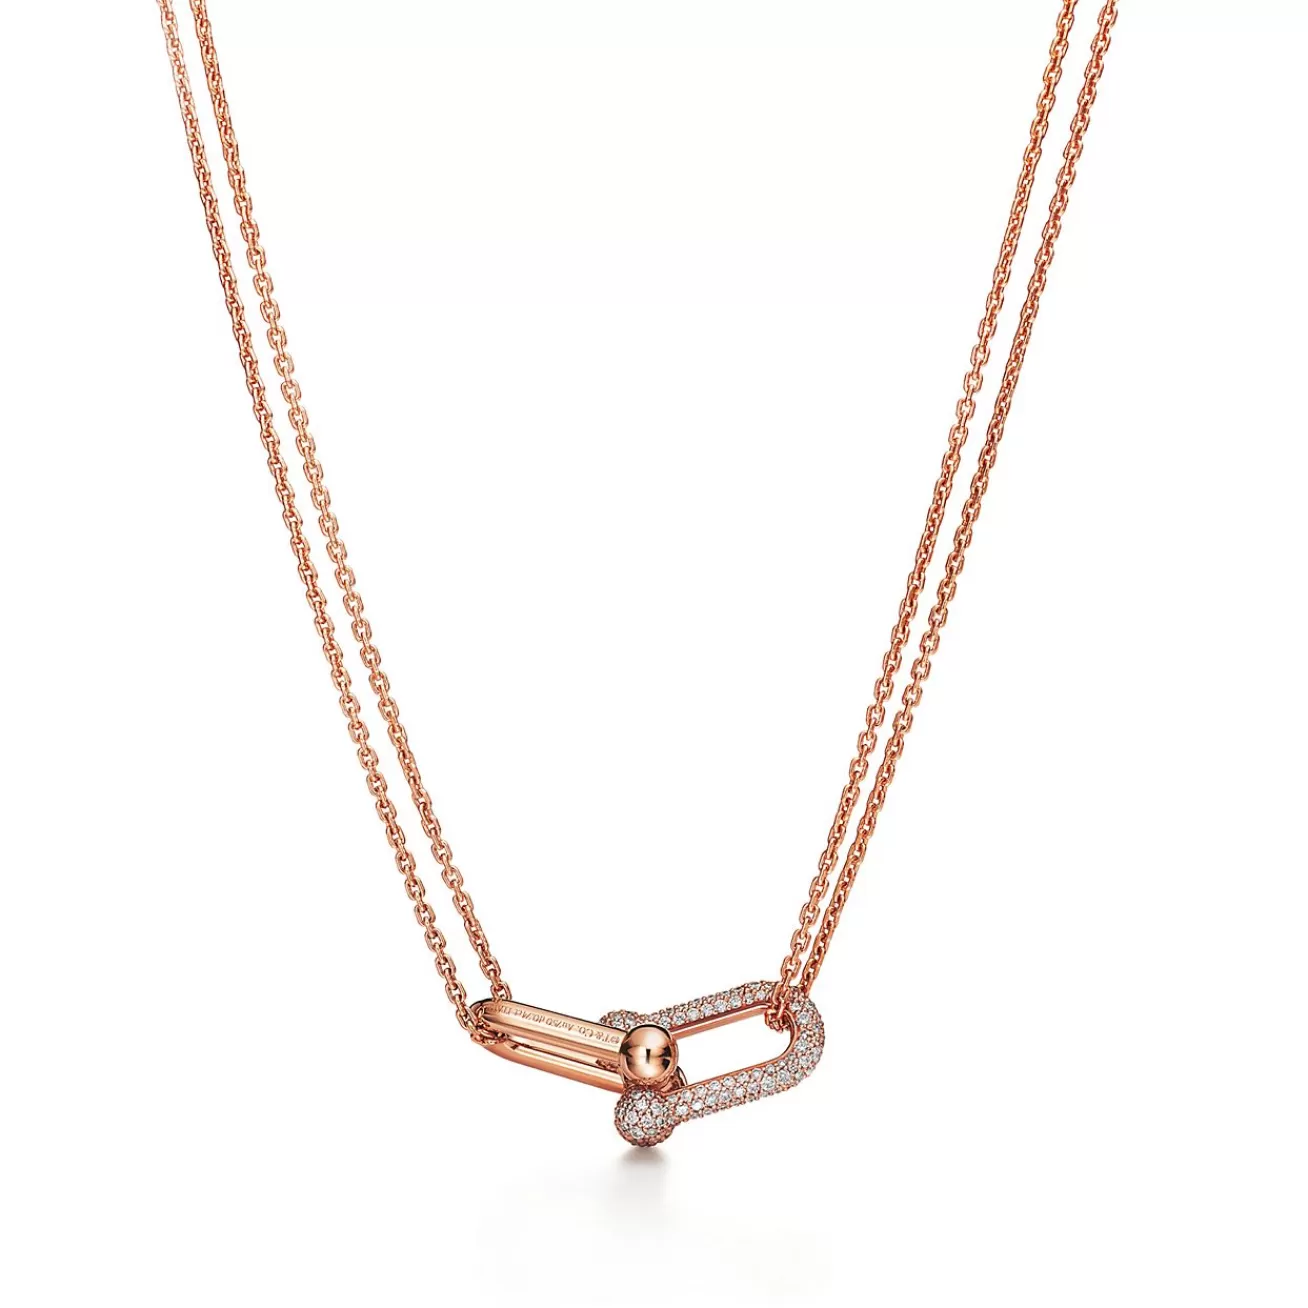 Tiffany & Co. Tiffany HardWear Large Double Link Pendant in Rose Gold with Pavé Diamonds | ^ Necklaces & Pendants | Gifts for Her